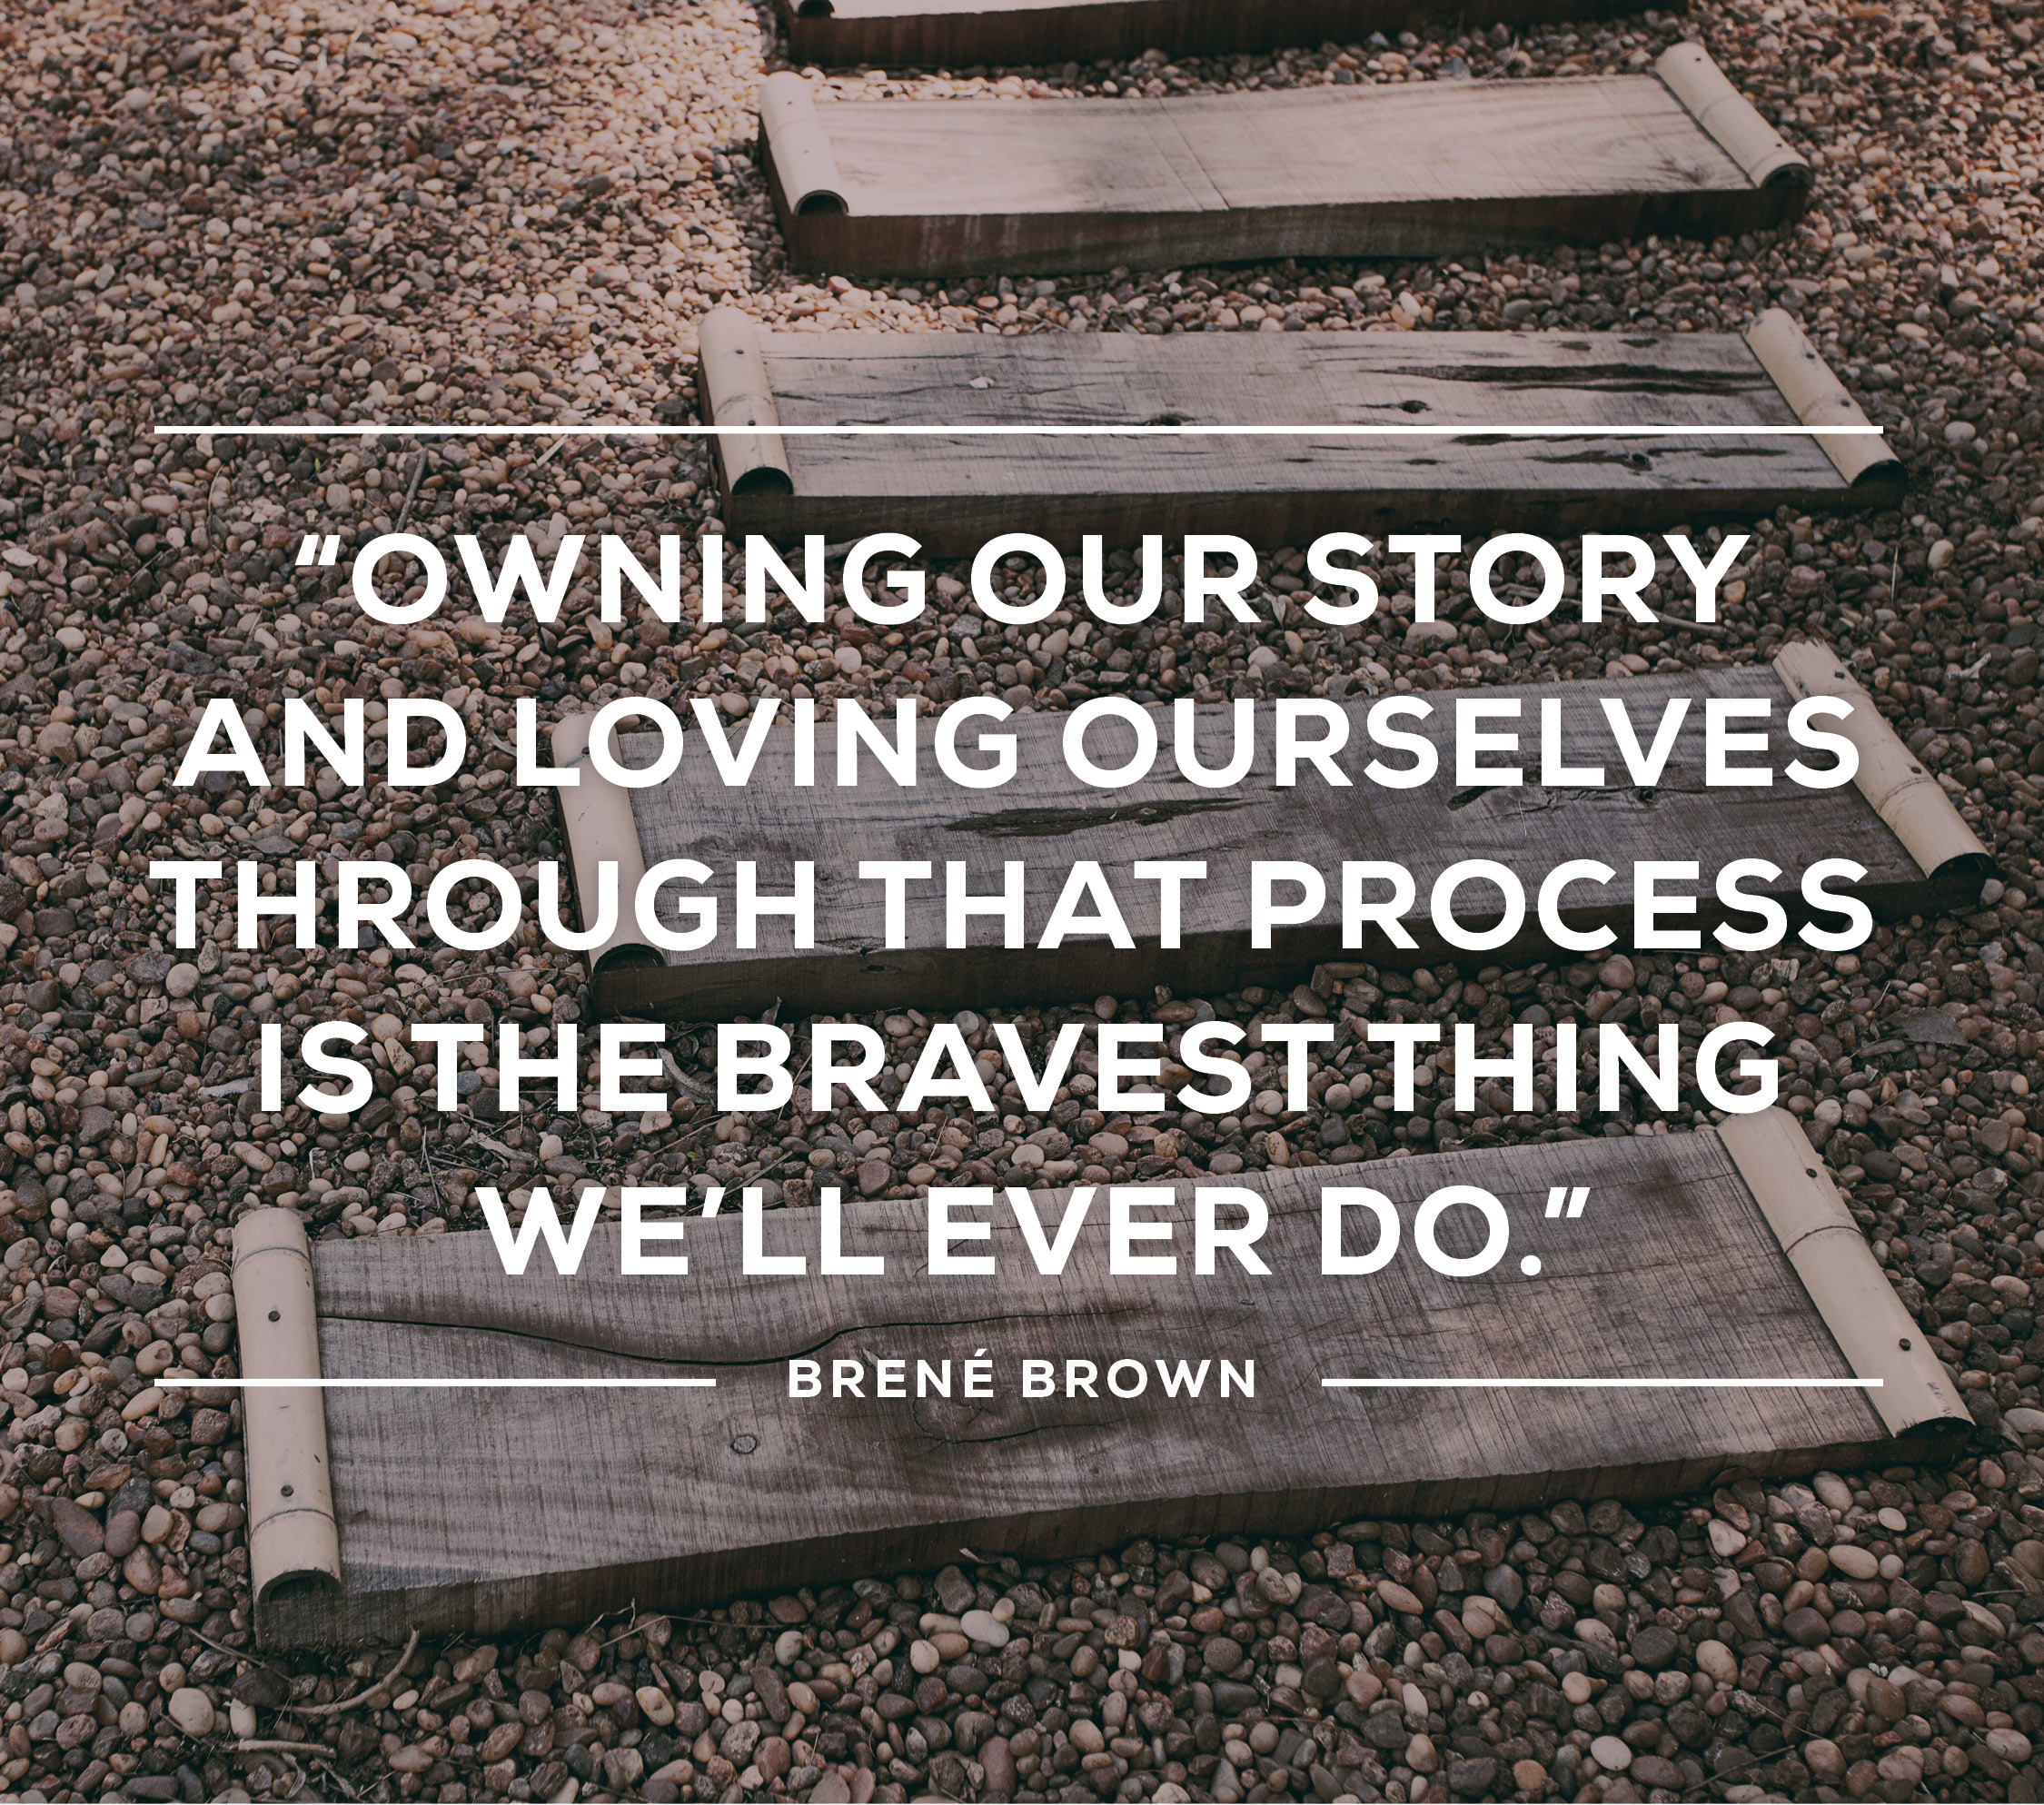 Owning our story and loving ourselves through that process is the bravest thing we'll ever do. ~Brené Brown